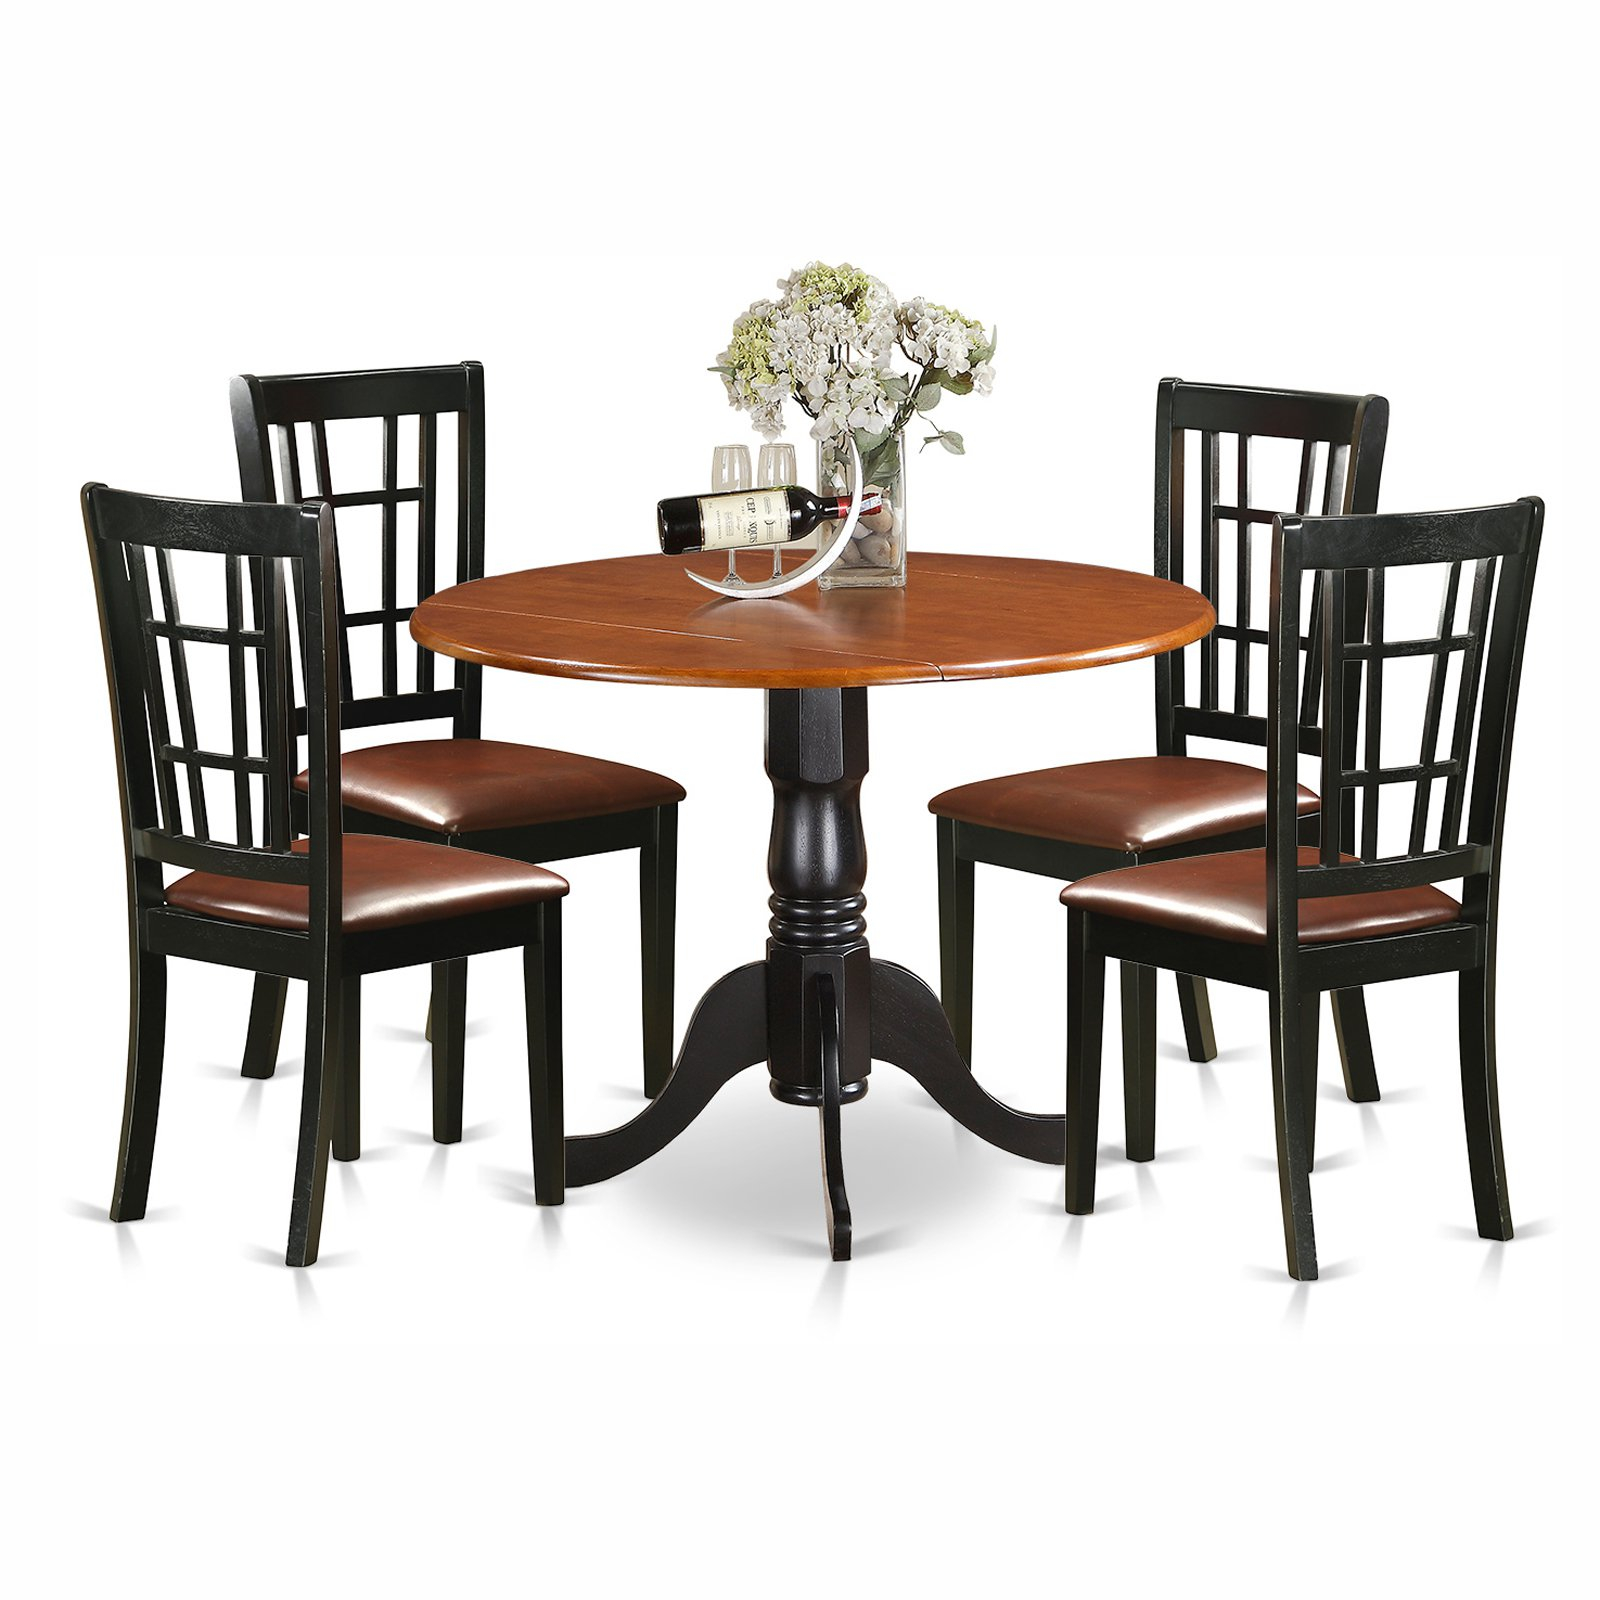 East West Furniture Dublin 5 Piece Drop Leaf Dining Table Set With Nicoli Faux Leather Seat Chairs intended for sizing 1600 X 1600